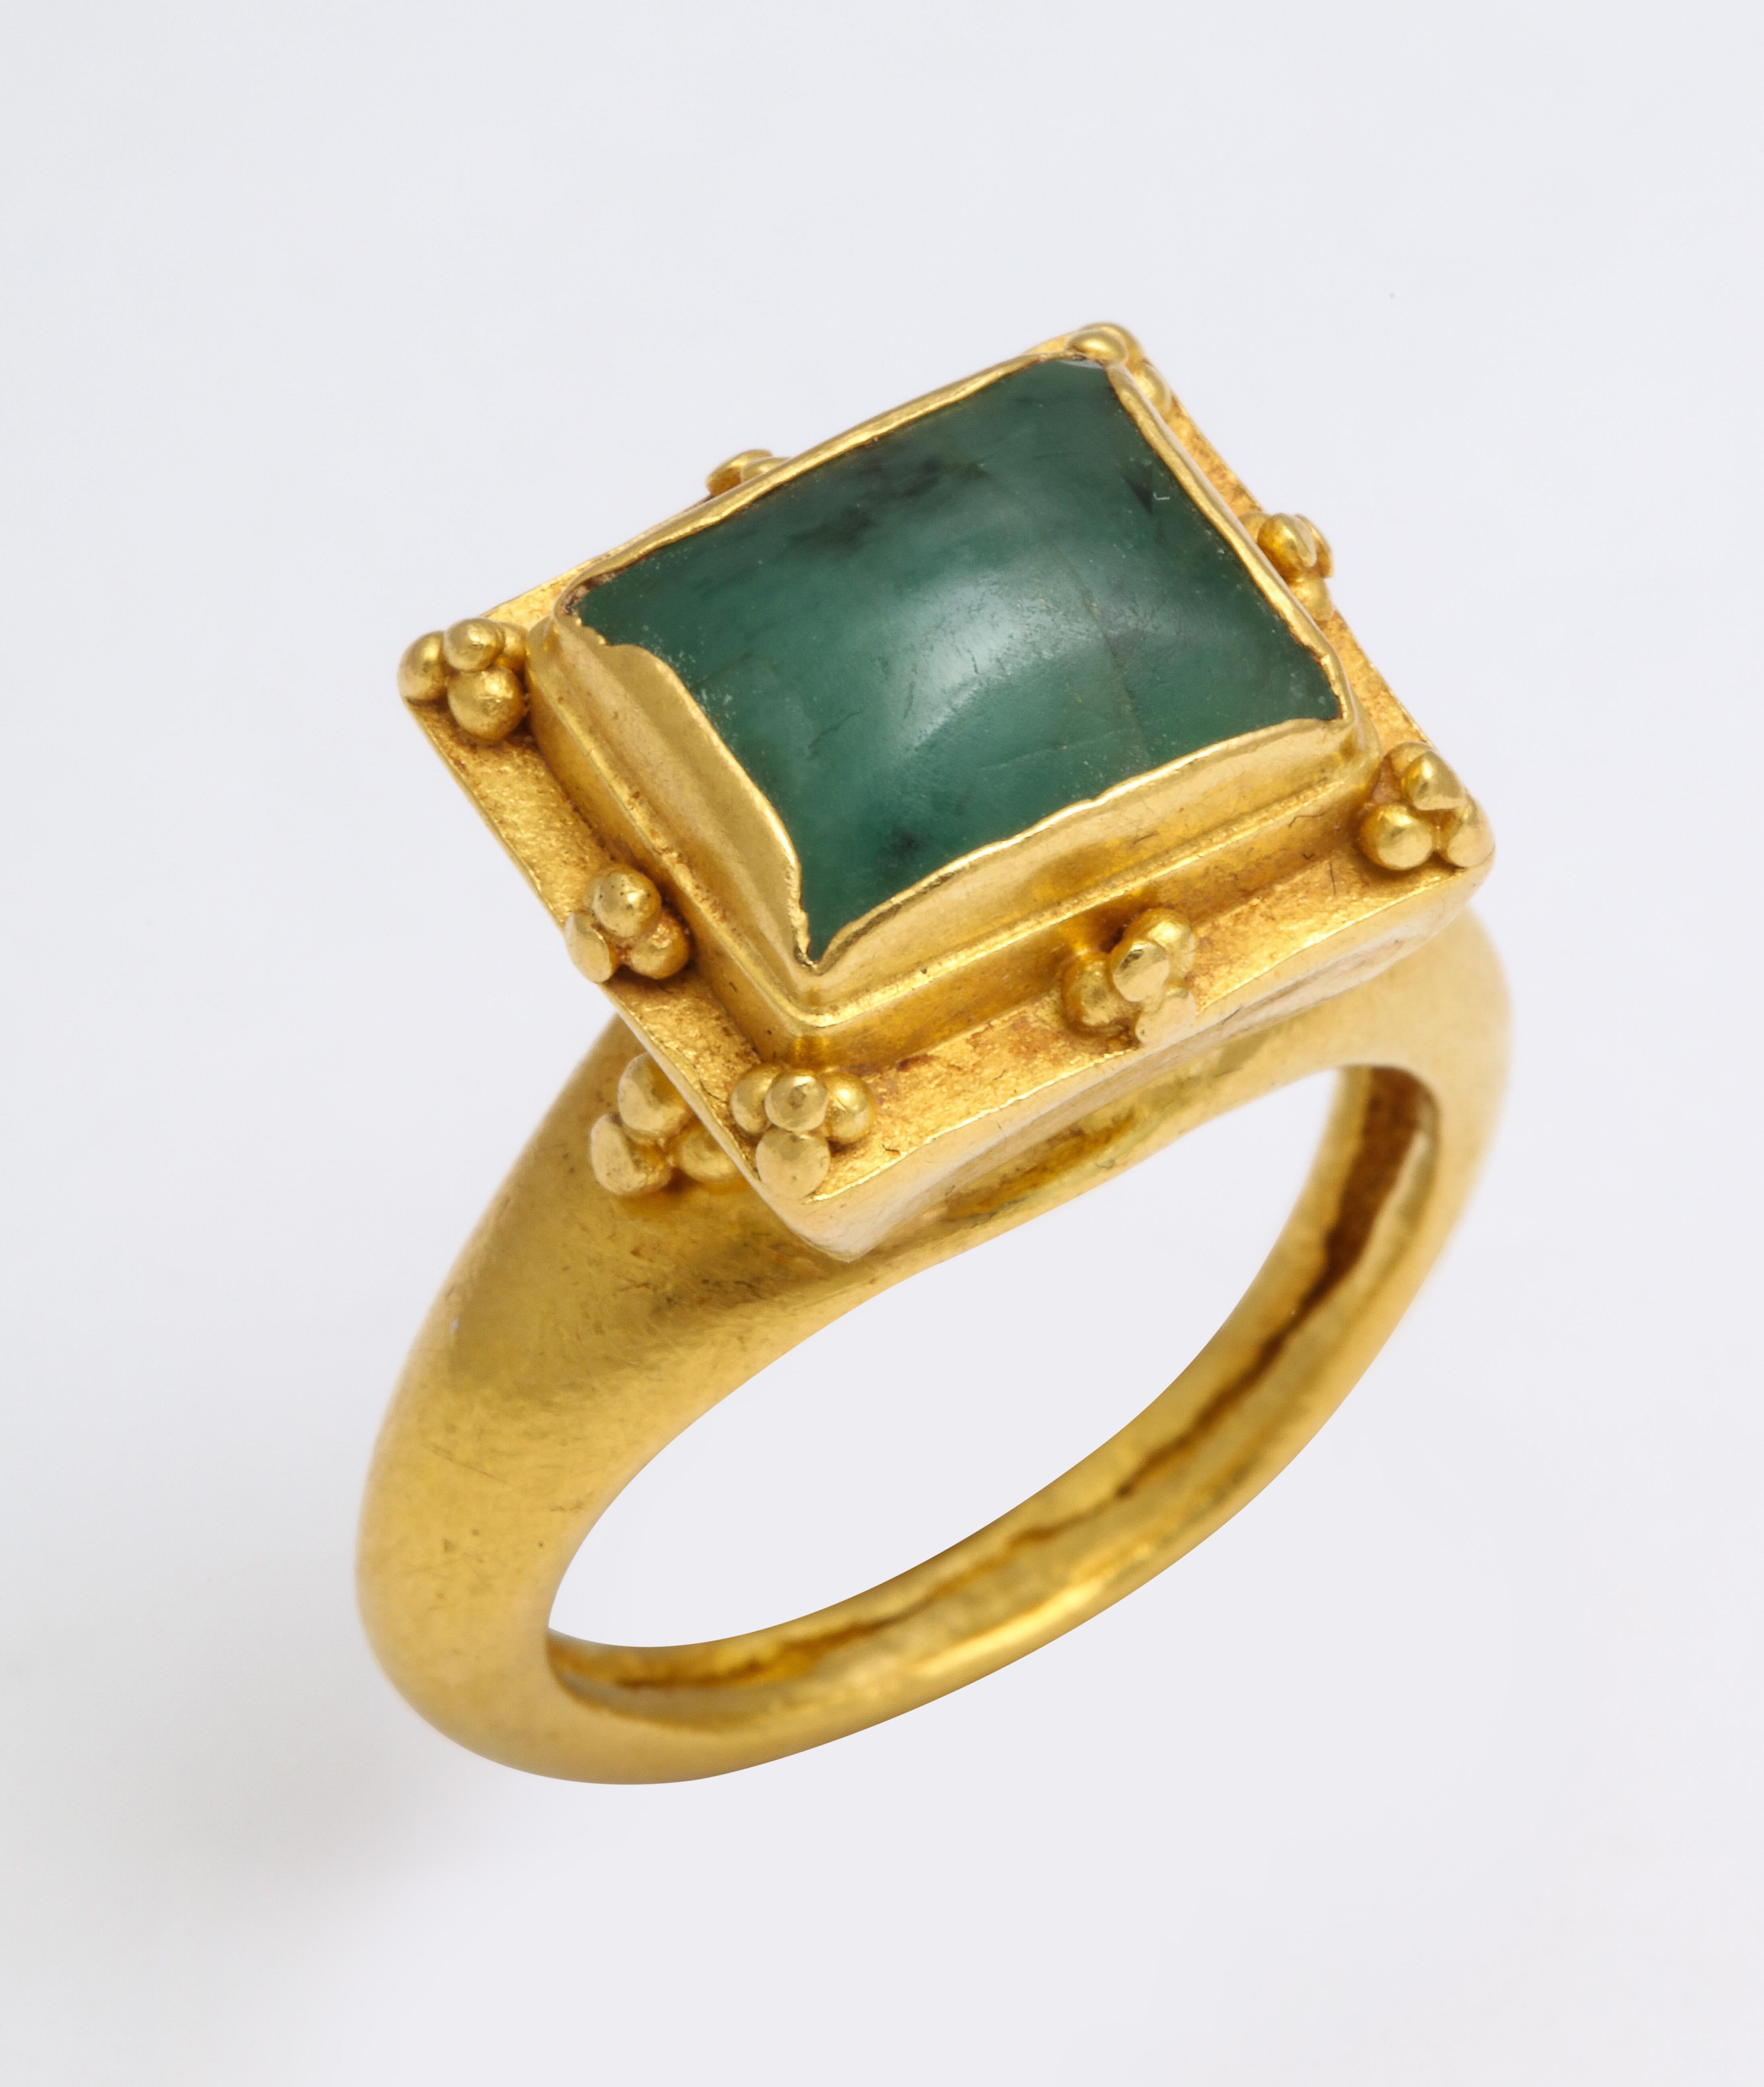 A rare 22 Kt. gold British ring with a circular shank is the stage for a trumpet bezel and square emerald stone. The setting is surrounded with elegant granulated decoration. The ring is gorgeous and likely belonged to a Medieval noblelady from the